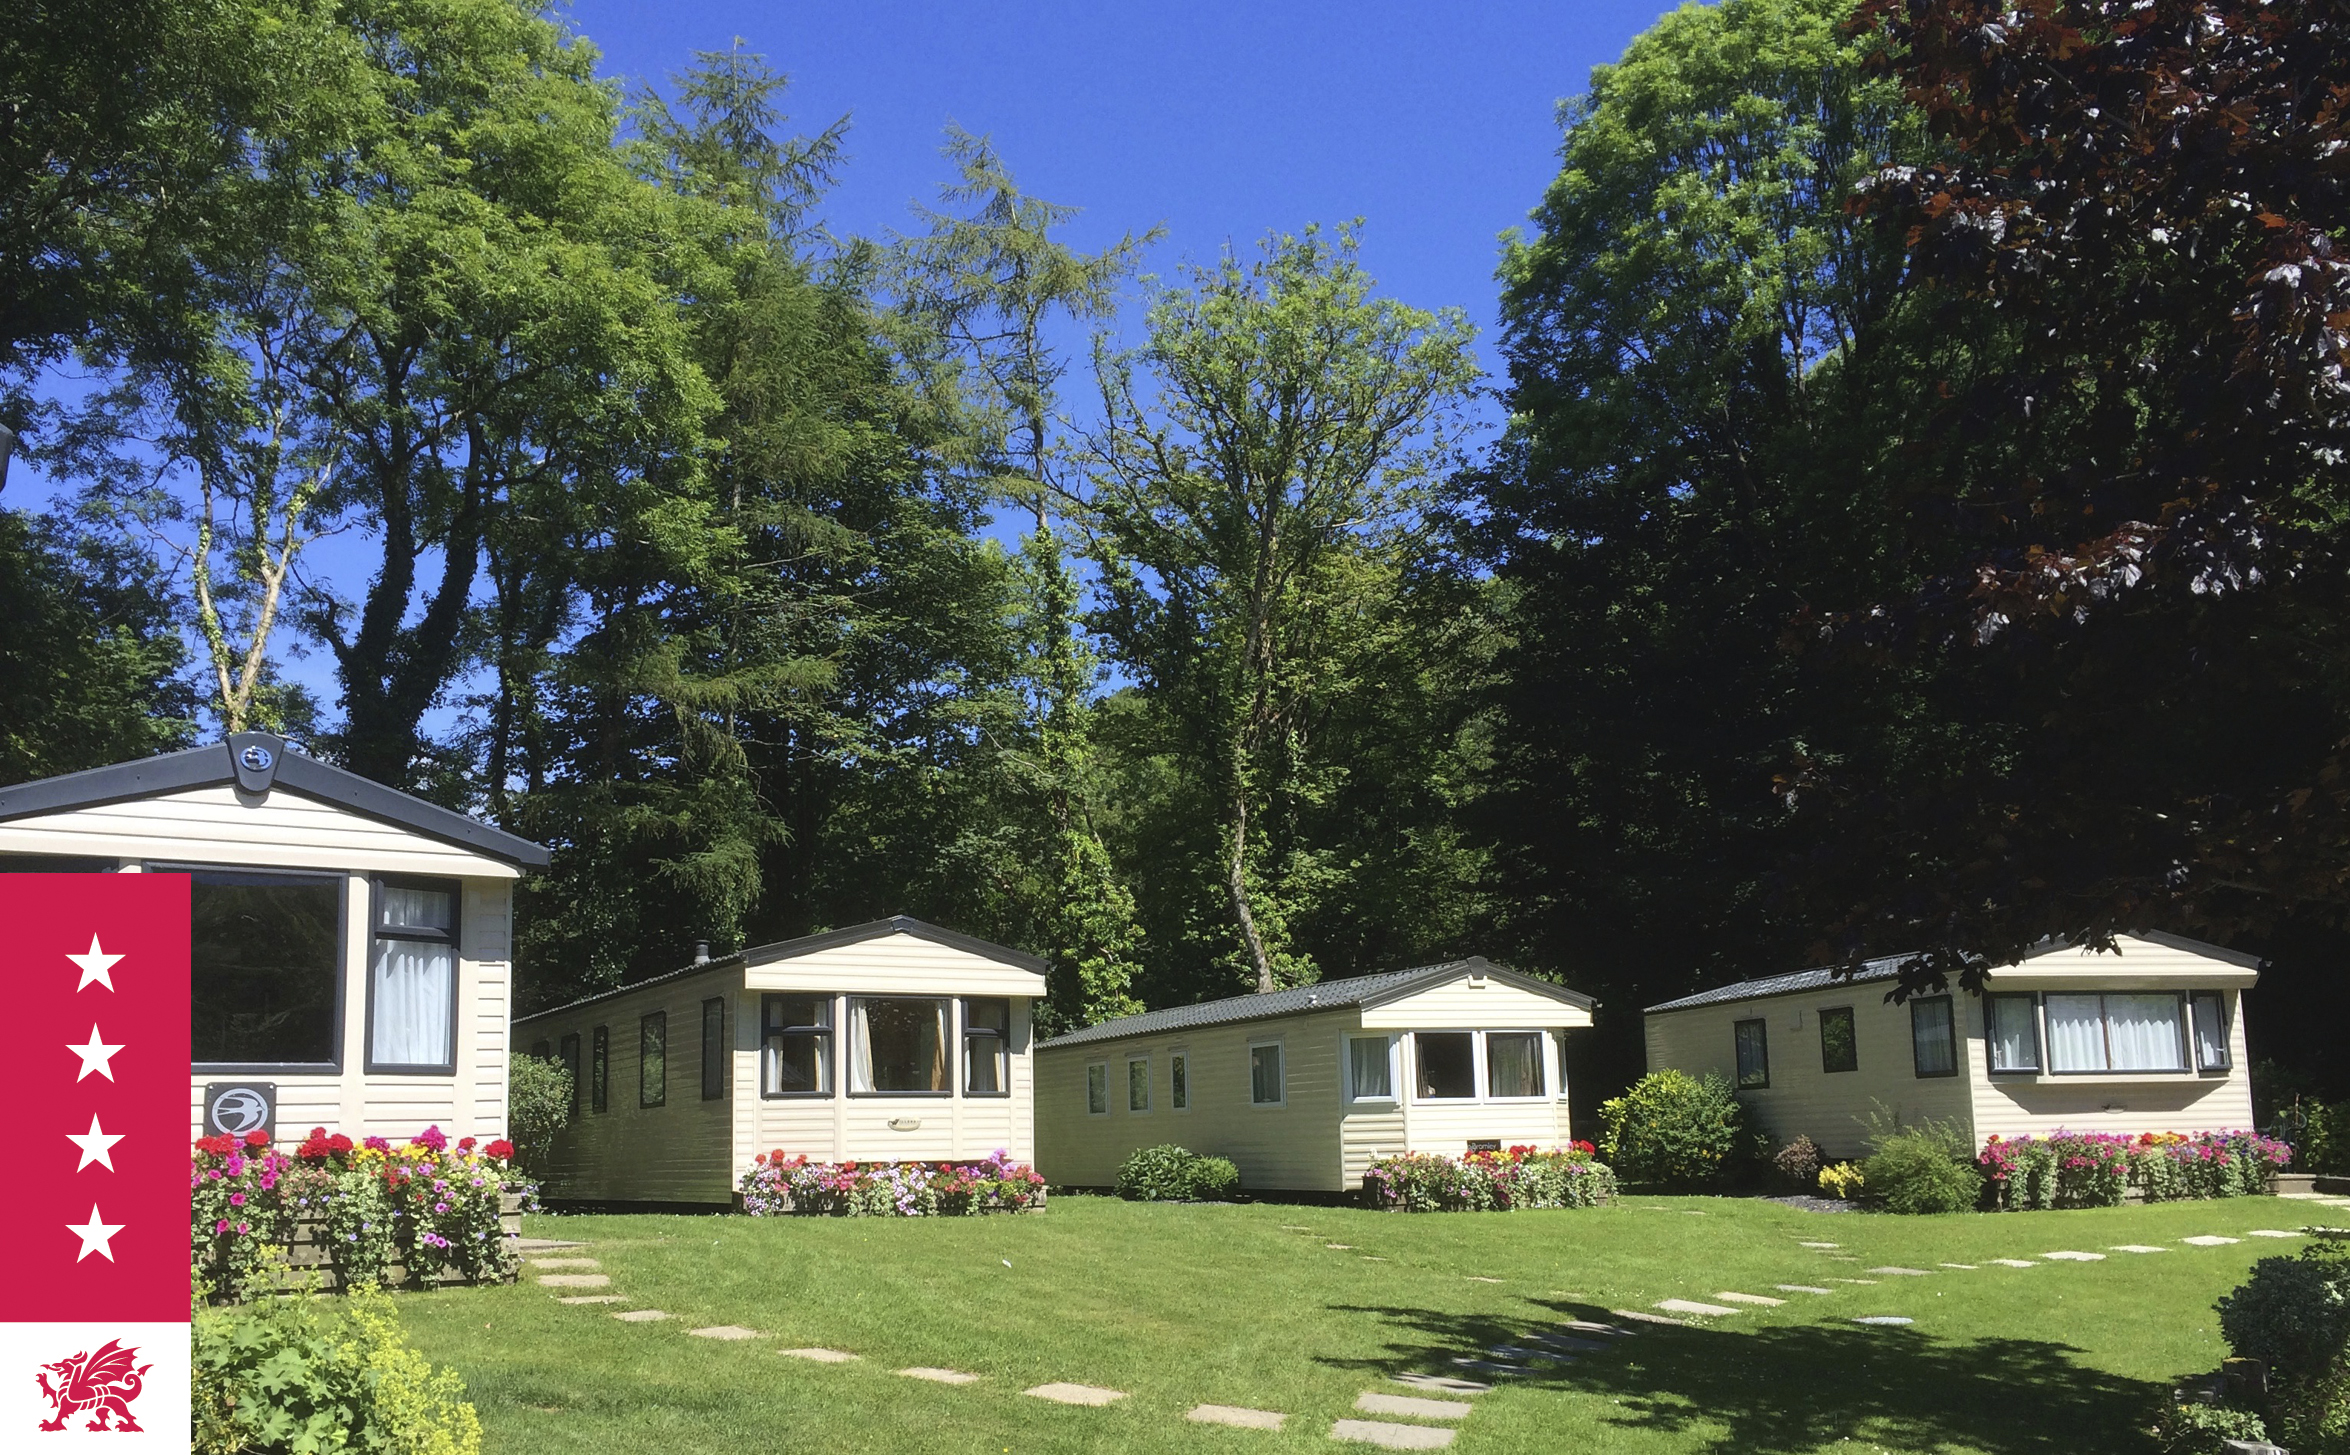 Self Catering Holiday Static Caravans with Central Heating